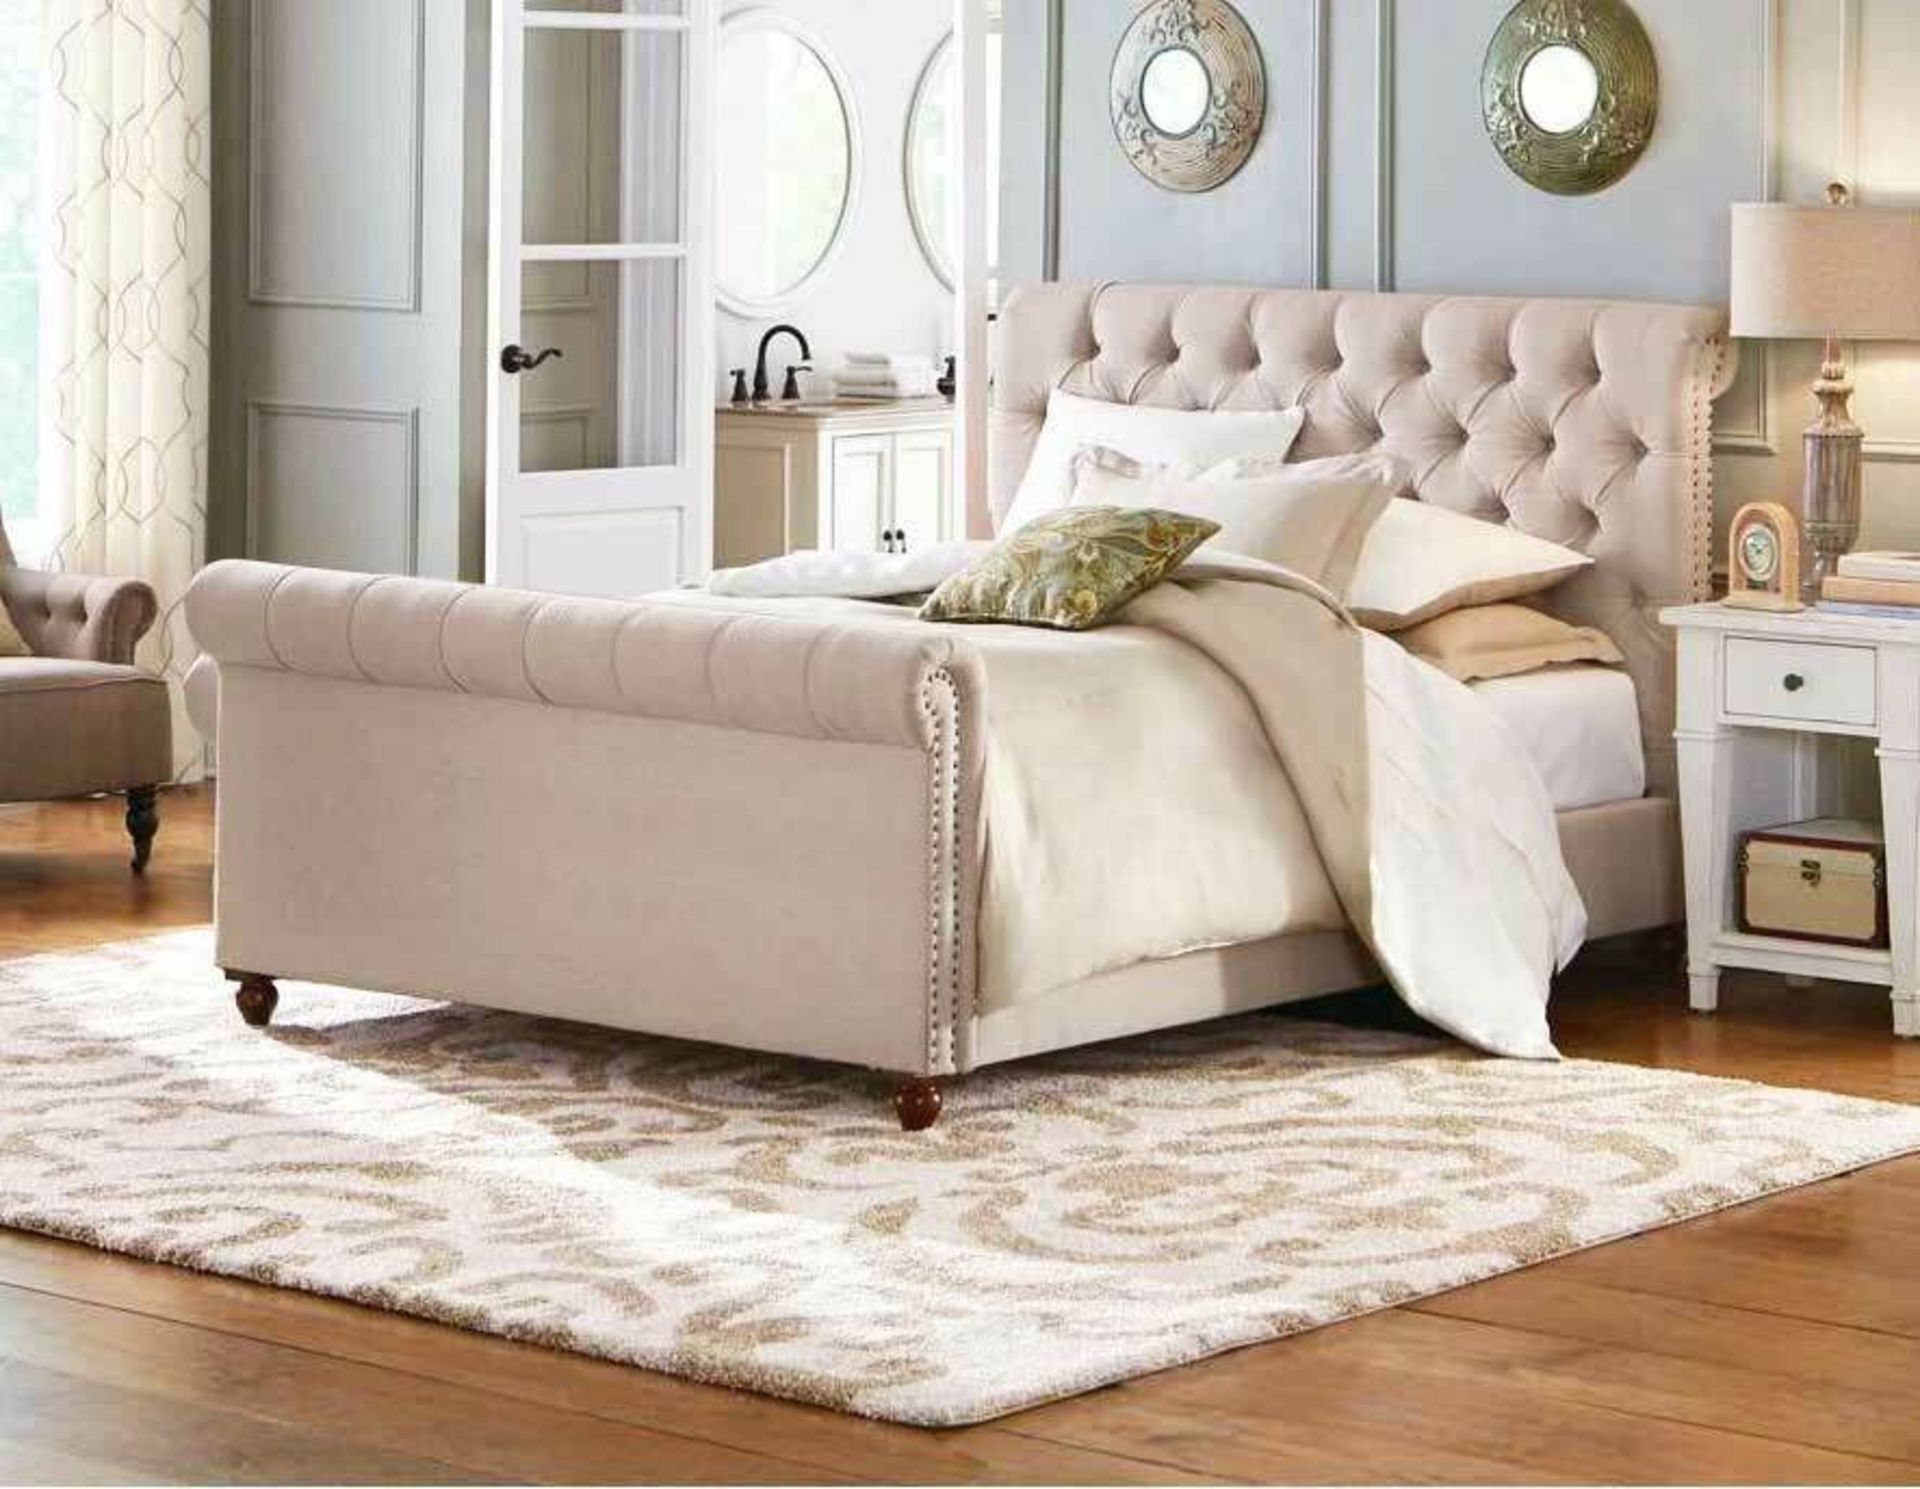 Duchess King Size Sleigh Bed Champagne Velvet A truly glamourous sleigh bed. This bed frame is fully - Bild 2 aus 2